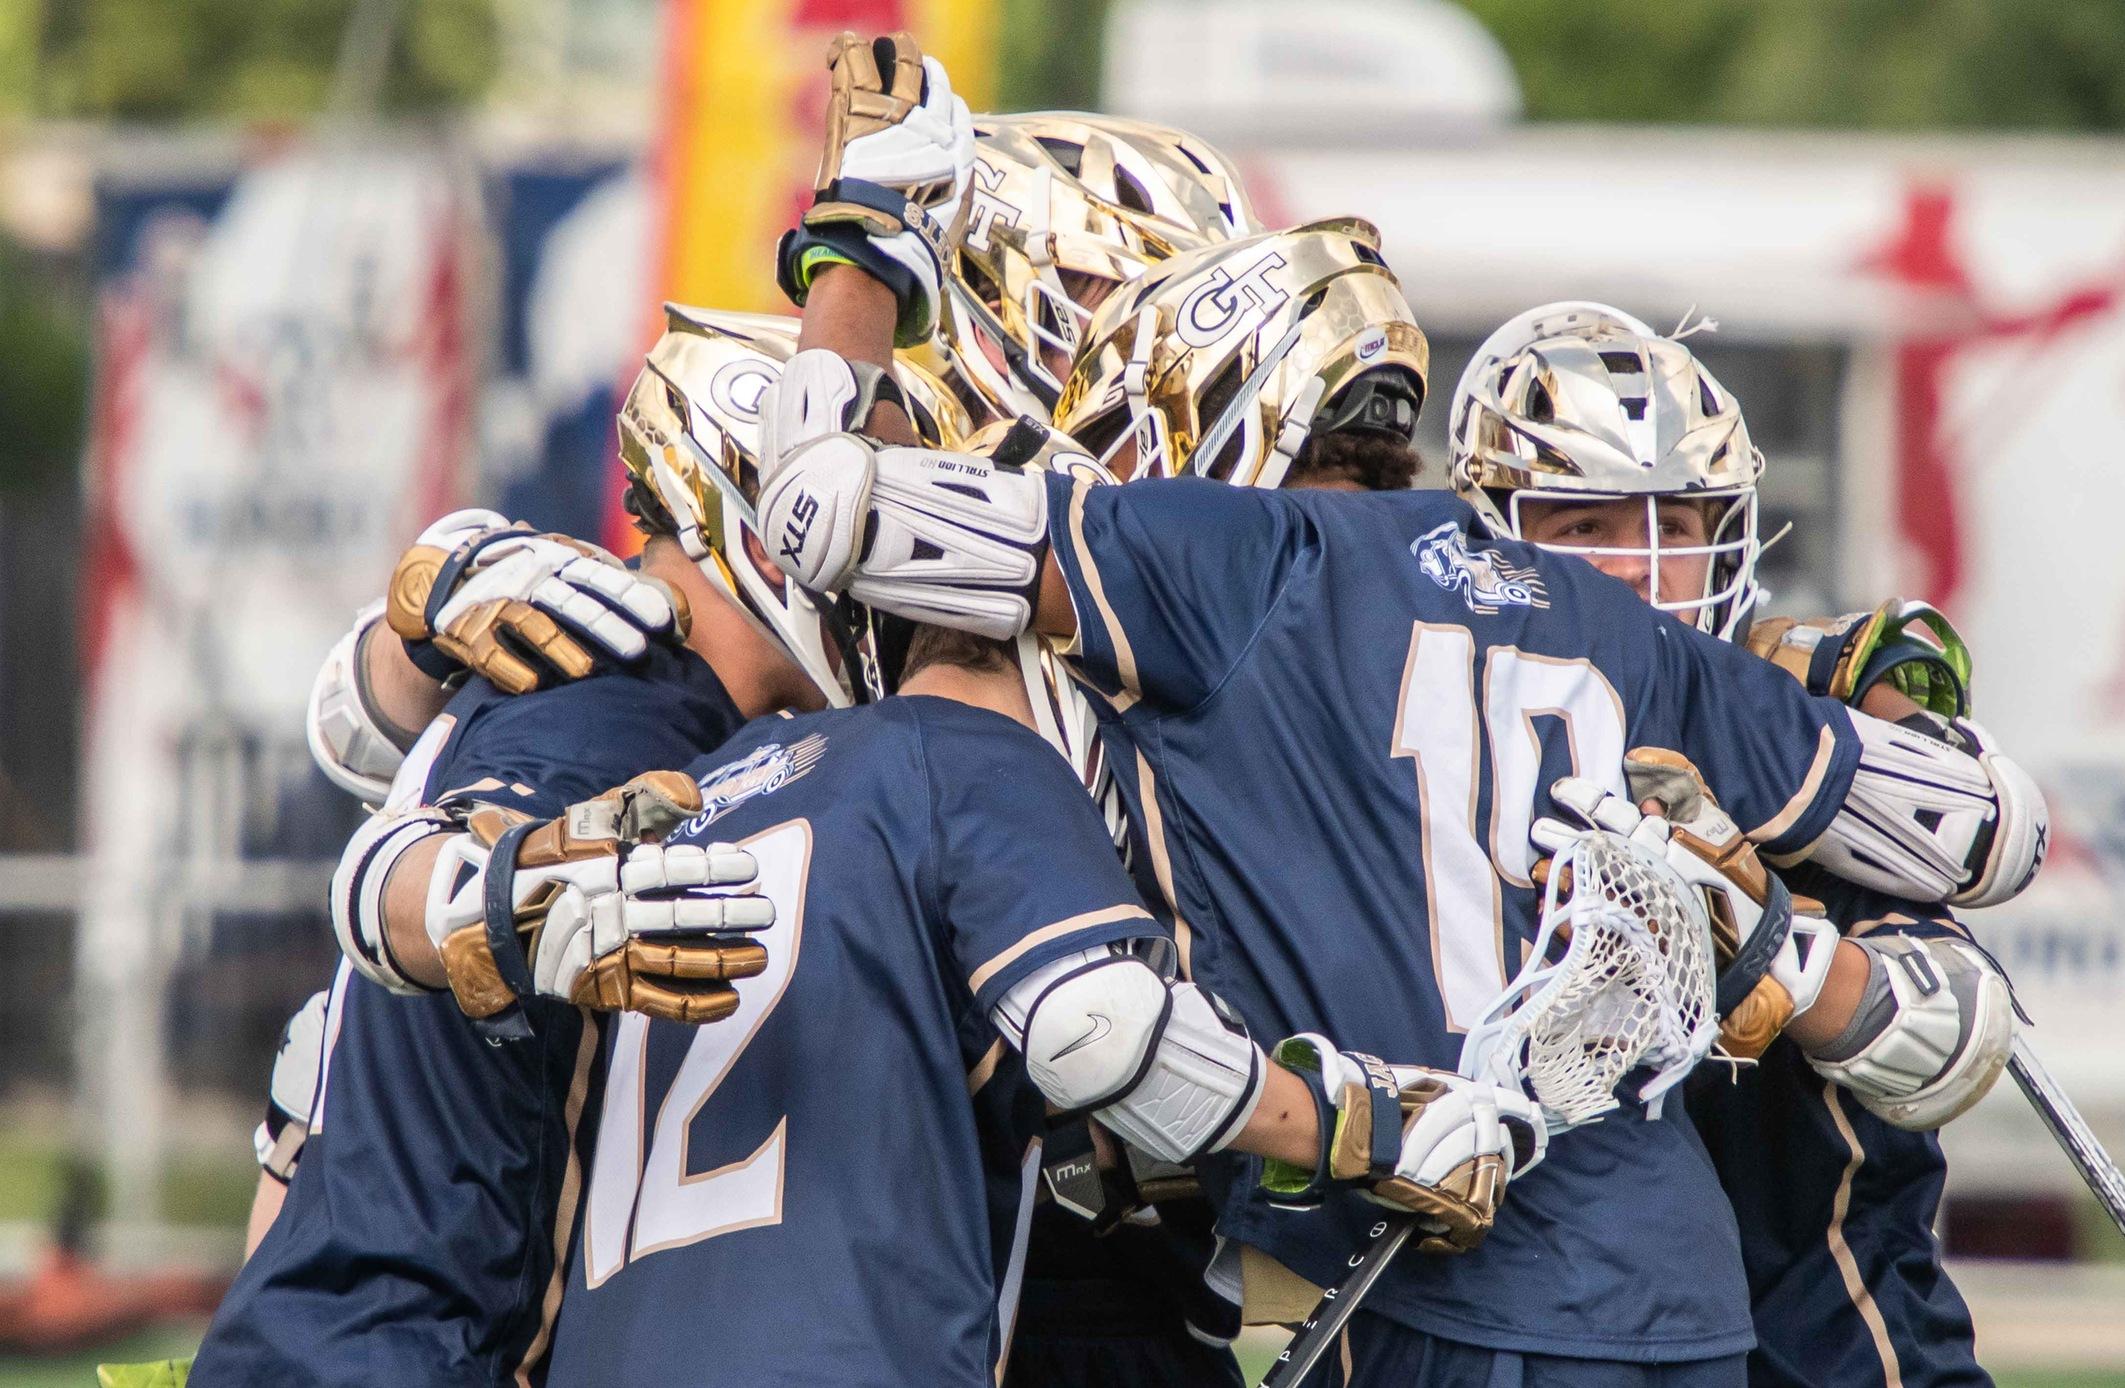 Five Jackets Receive 2022 MCLA Division One Honors